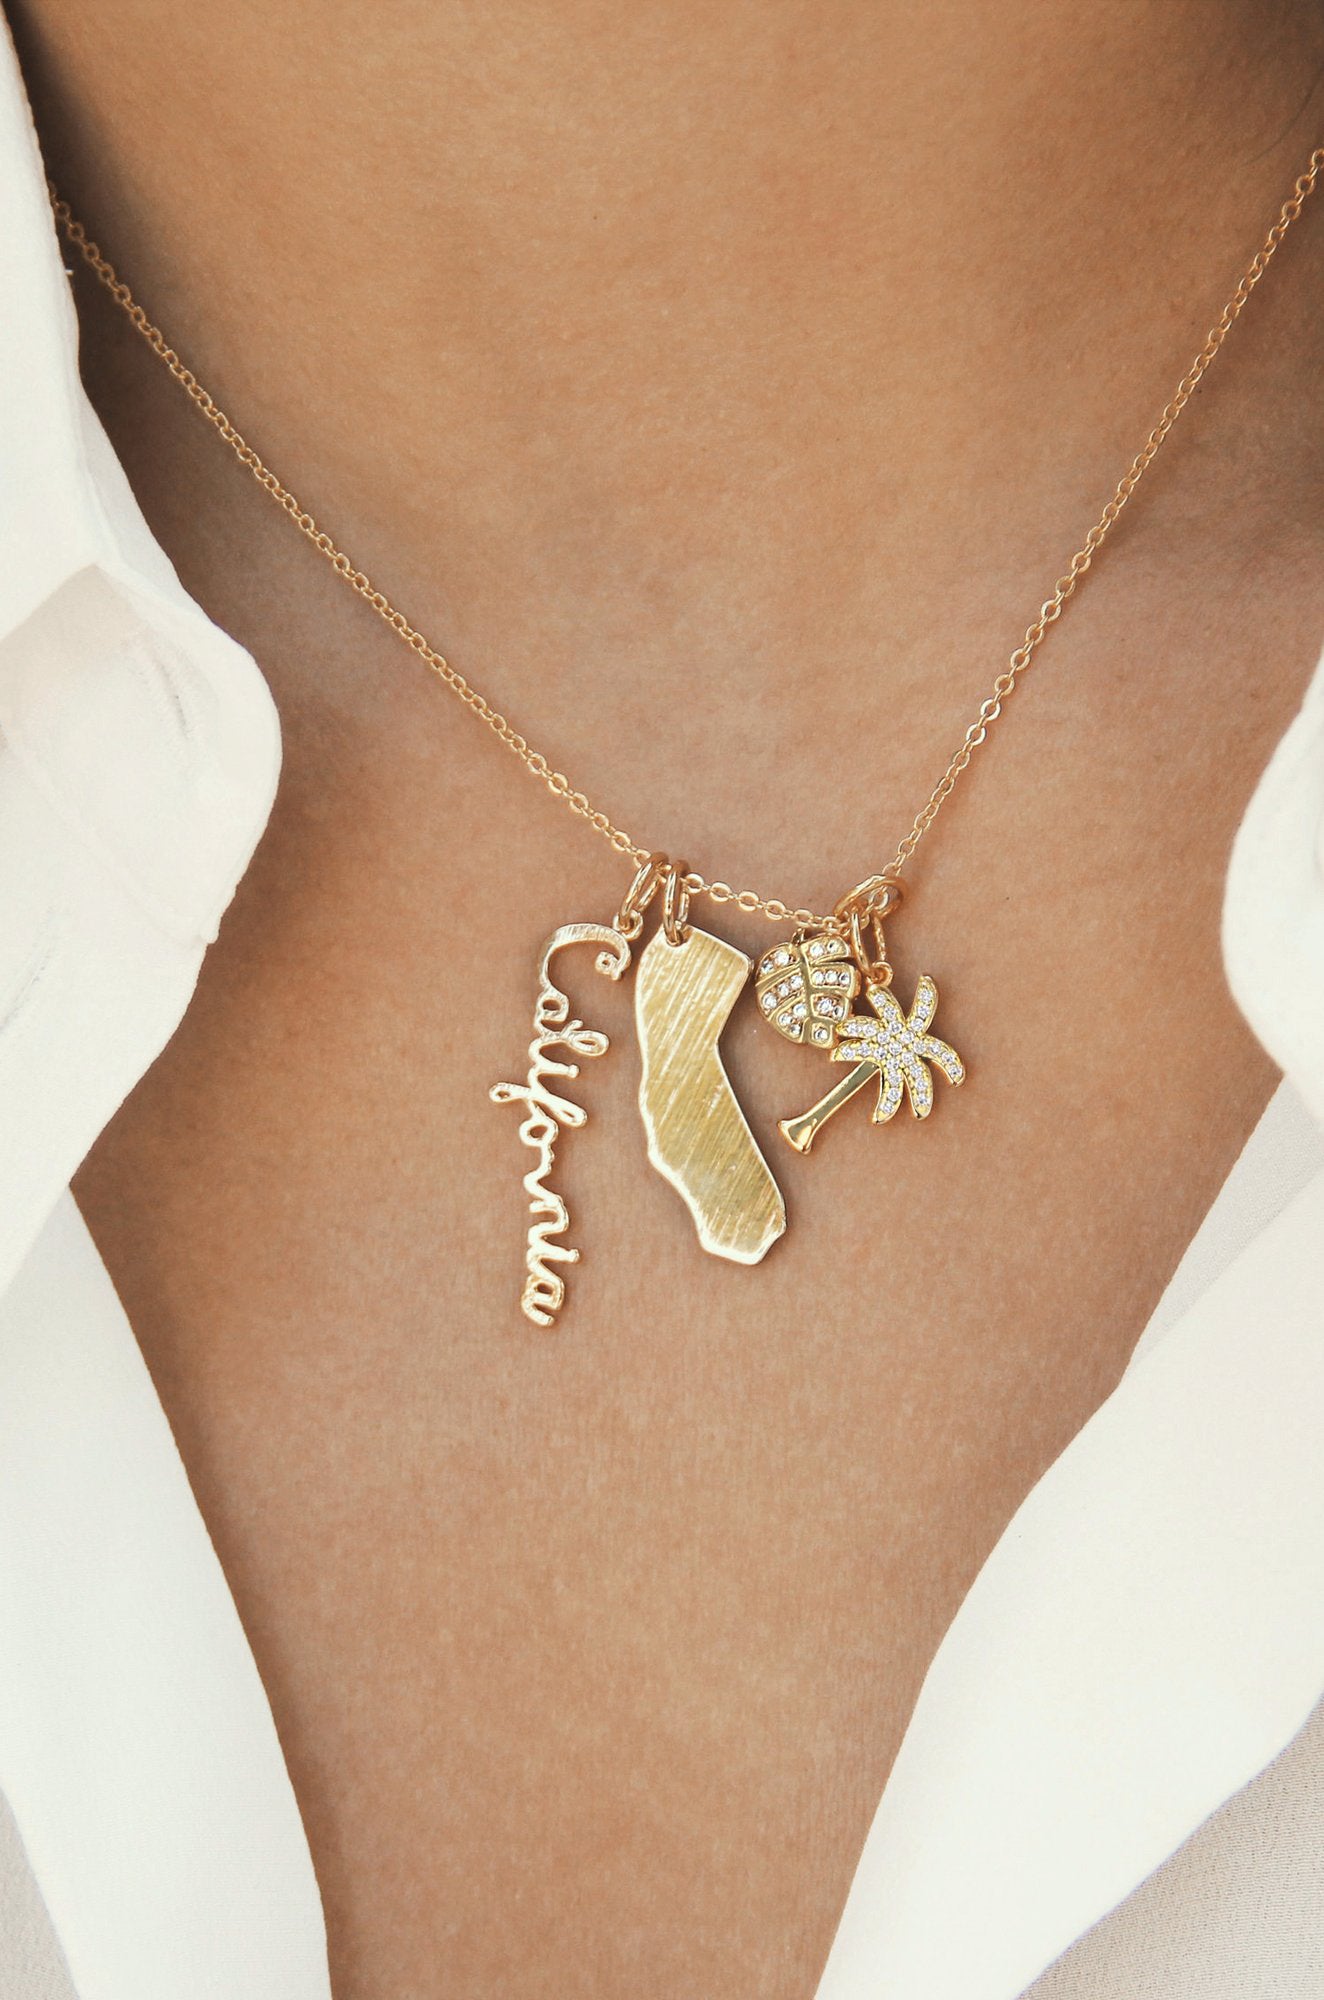 California Cool 18k Gold Plated Interchangeable Charm Necklace shown on a model  